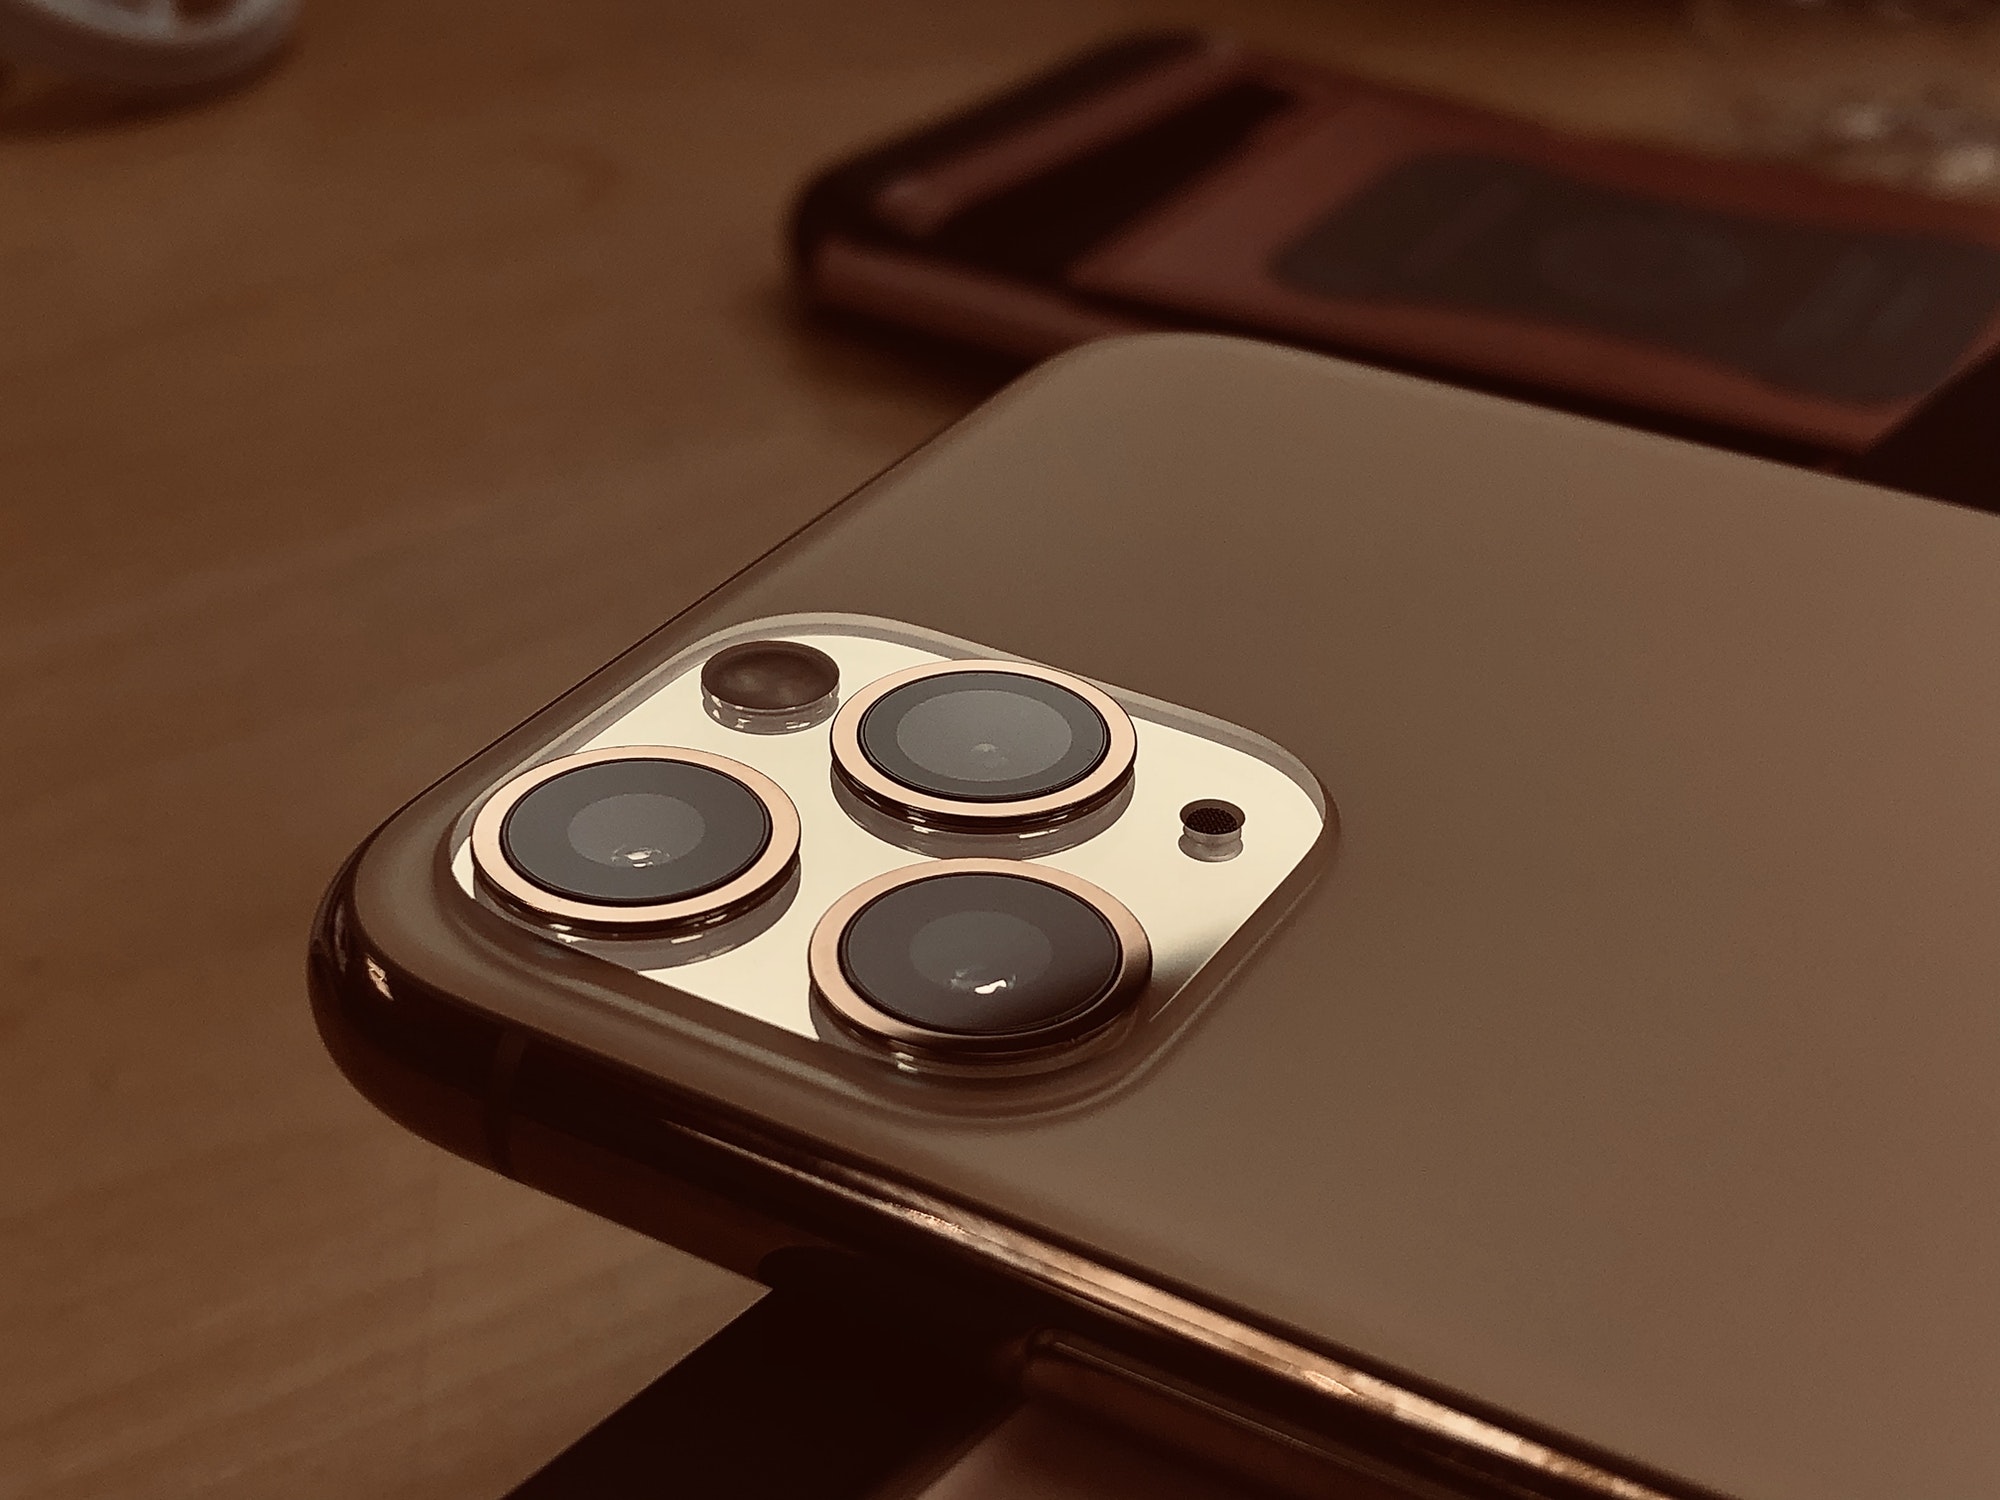 The triple lens camera on the iPhone 11 Pro Max! 📱